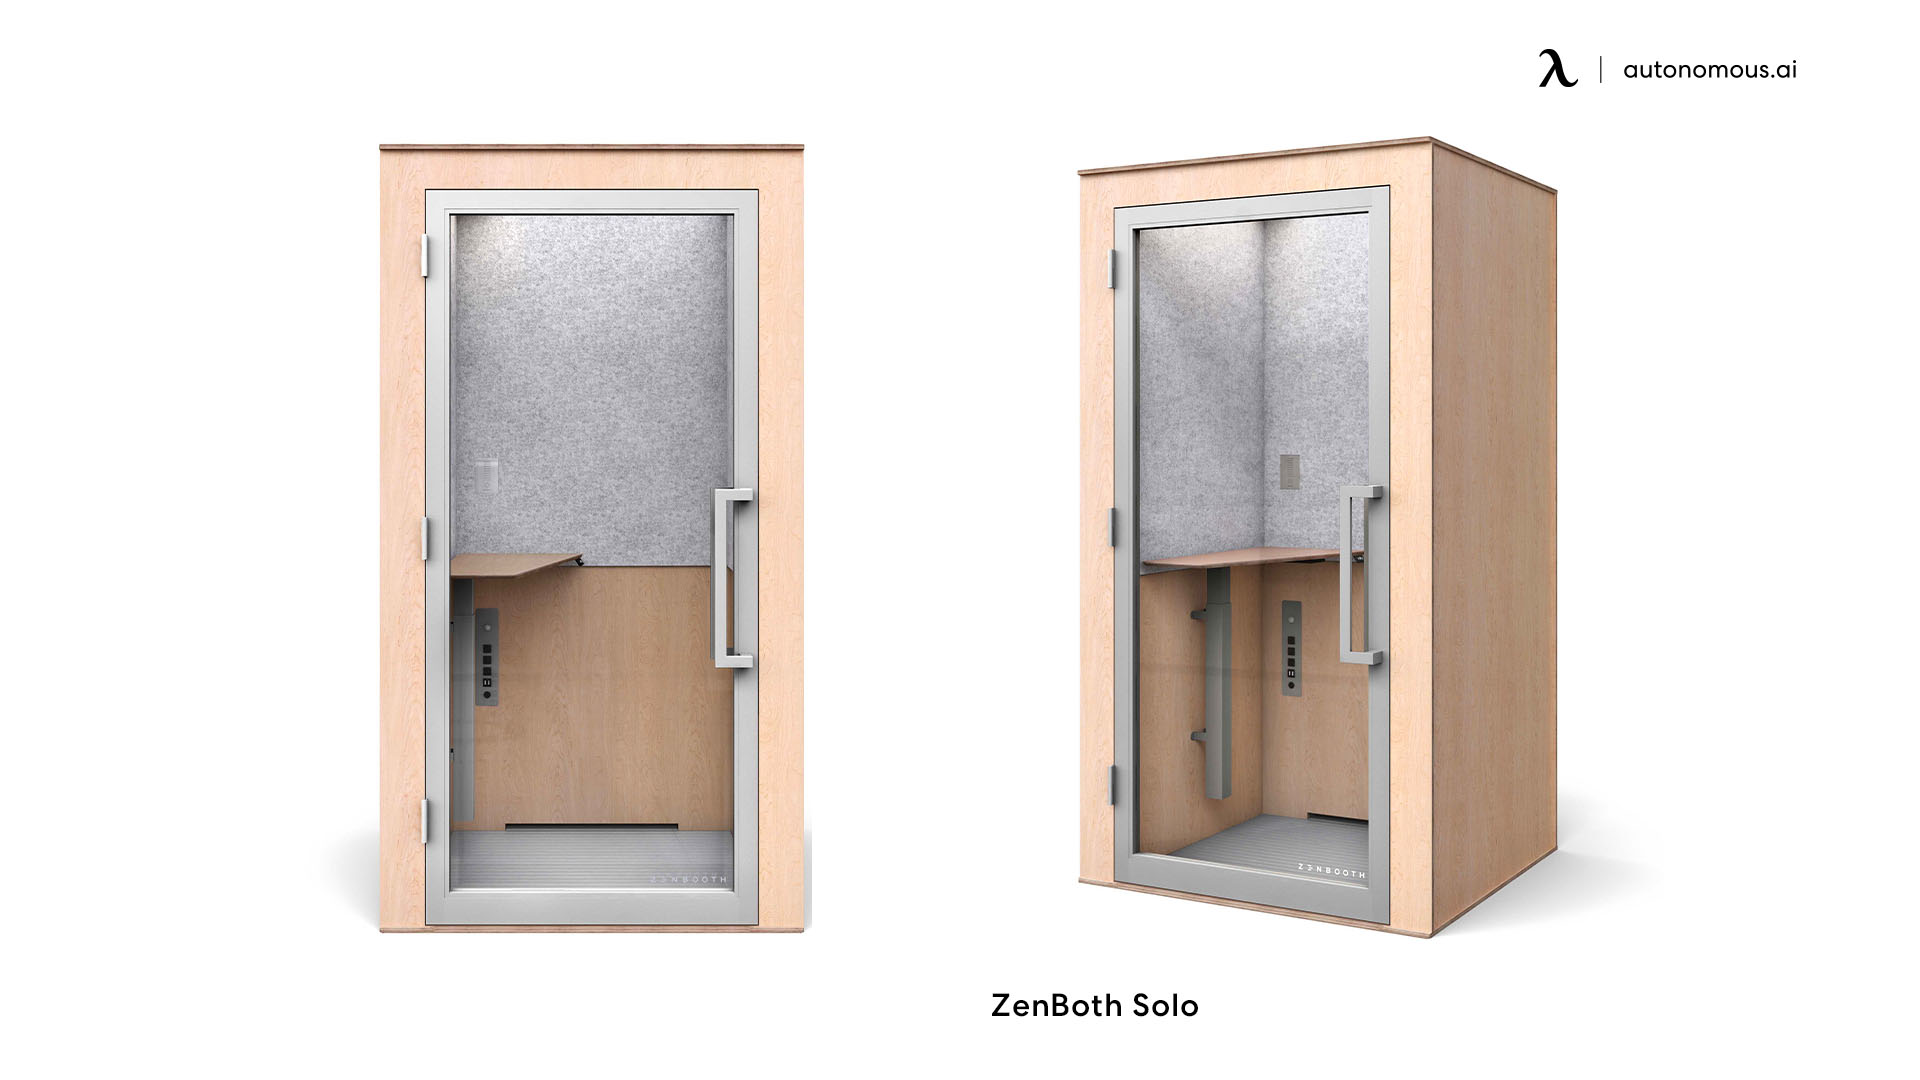 ZenBoth Solo soundproof office pod